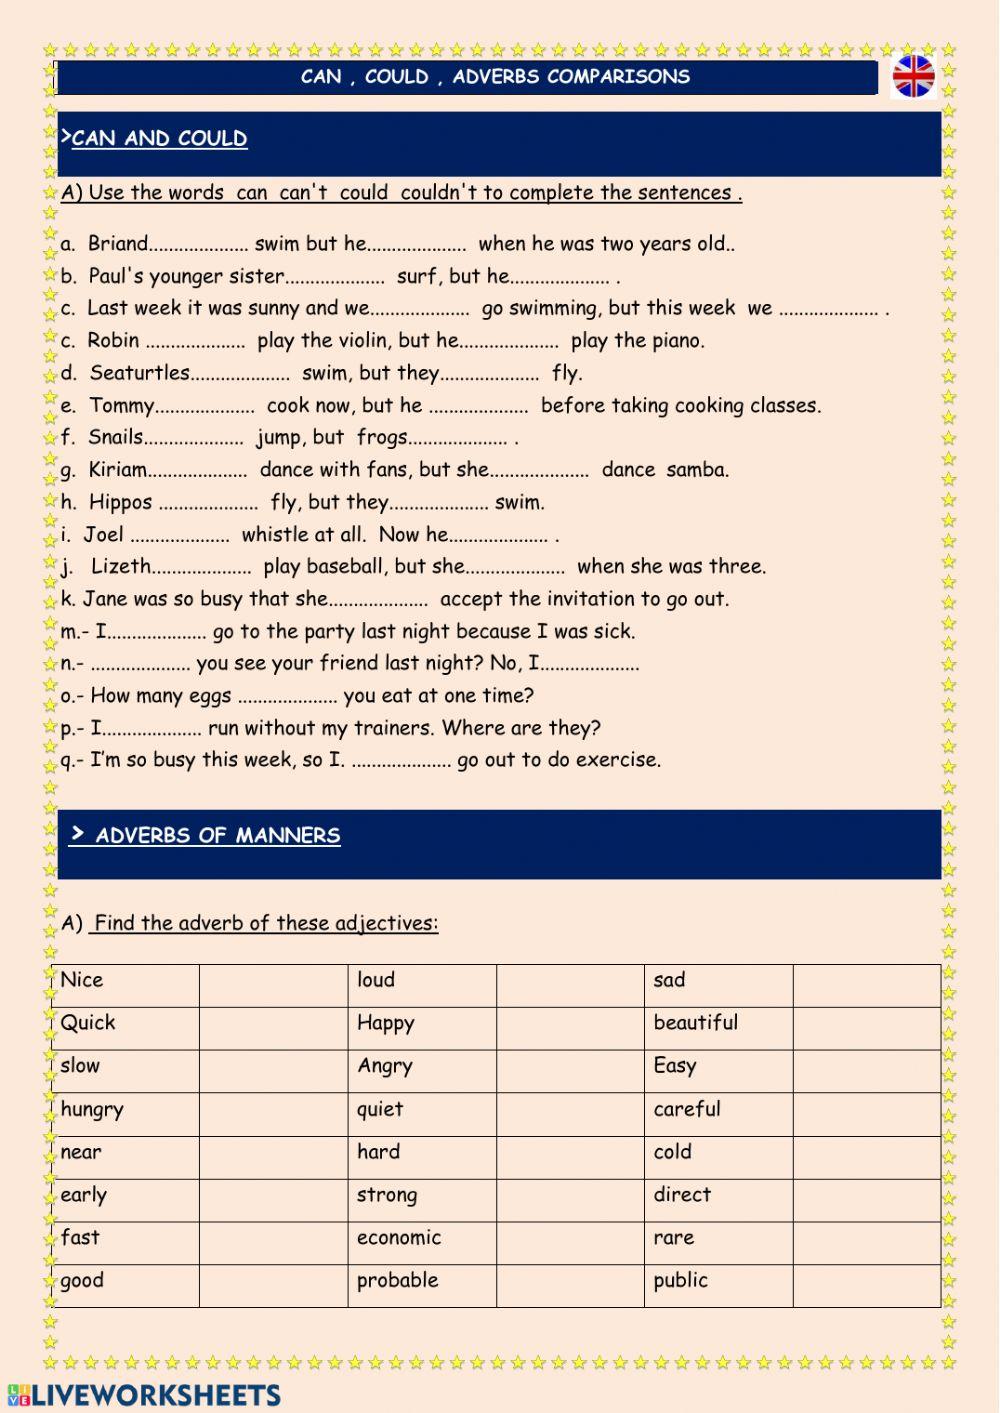 Can,could,adverbs,comparisons